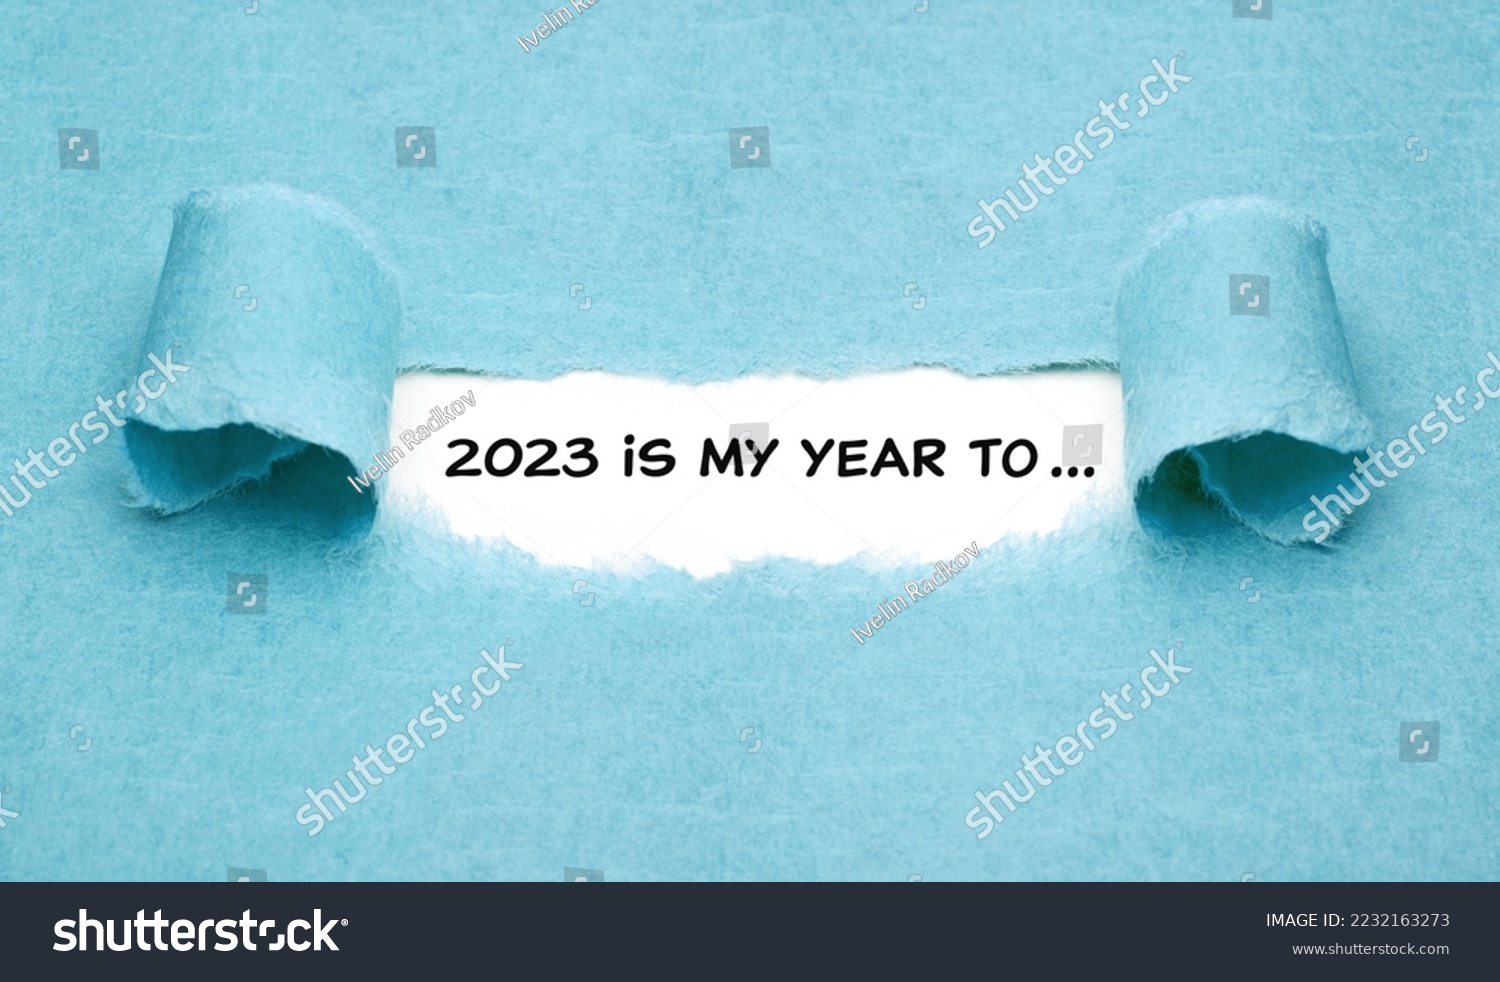 Motivational New Year 2023 resolutions list concept with headline 2023 is my year to written on paper.  #2232163273